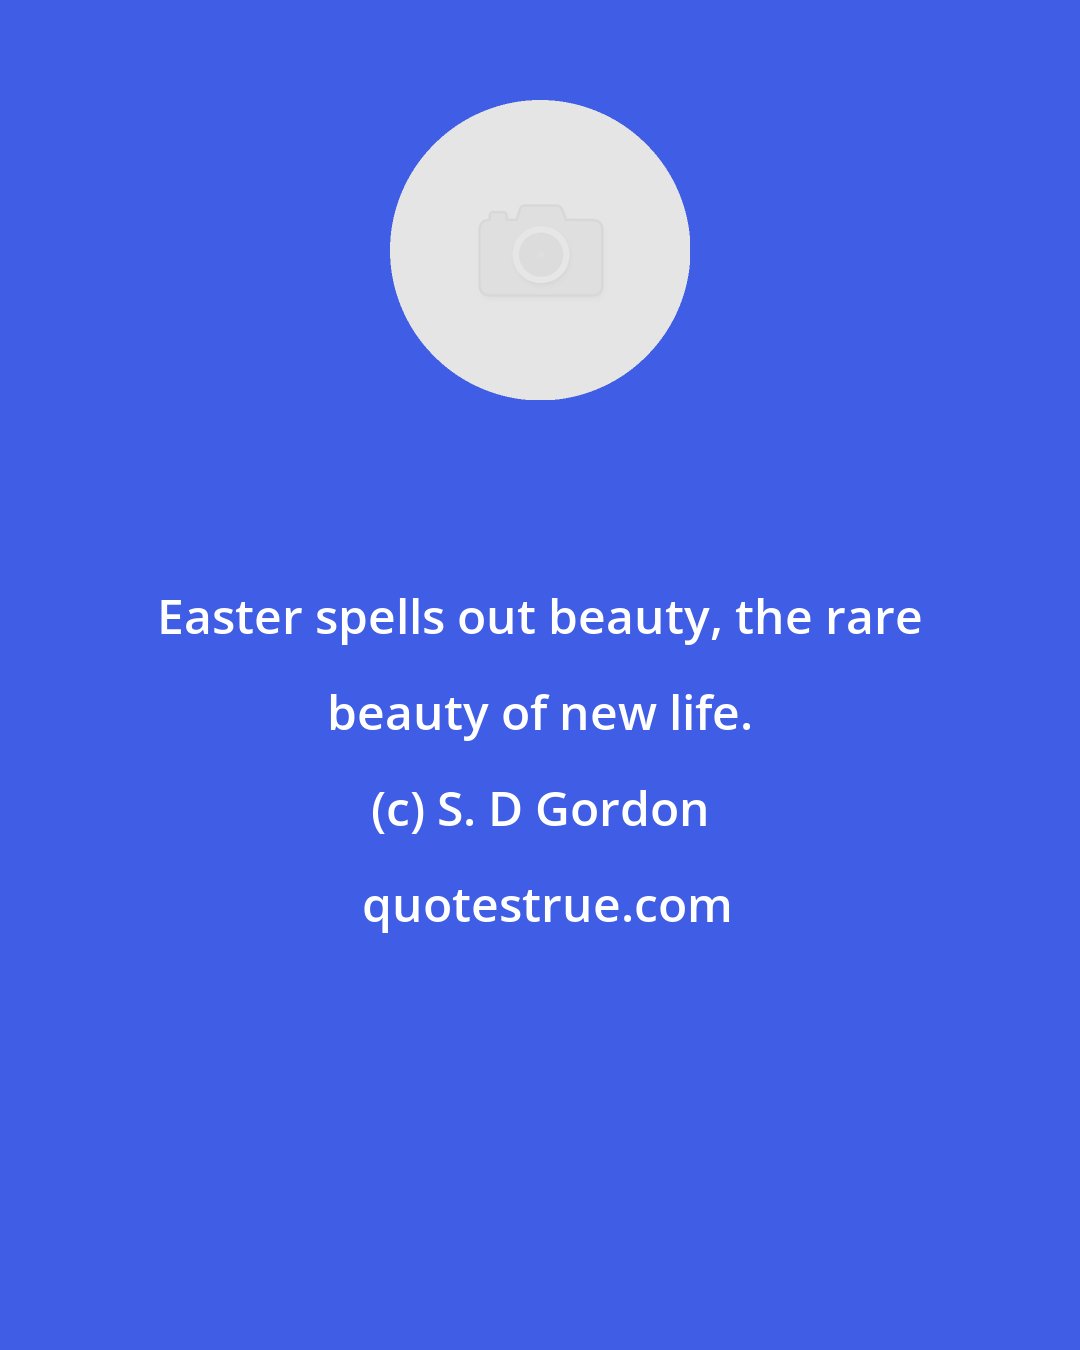 S. D Gordon: Easter spells out beauty, the rare beauty of new life.